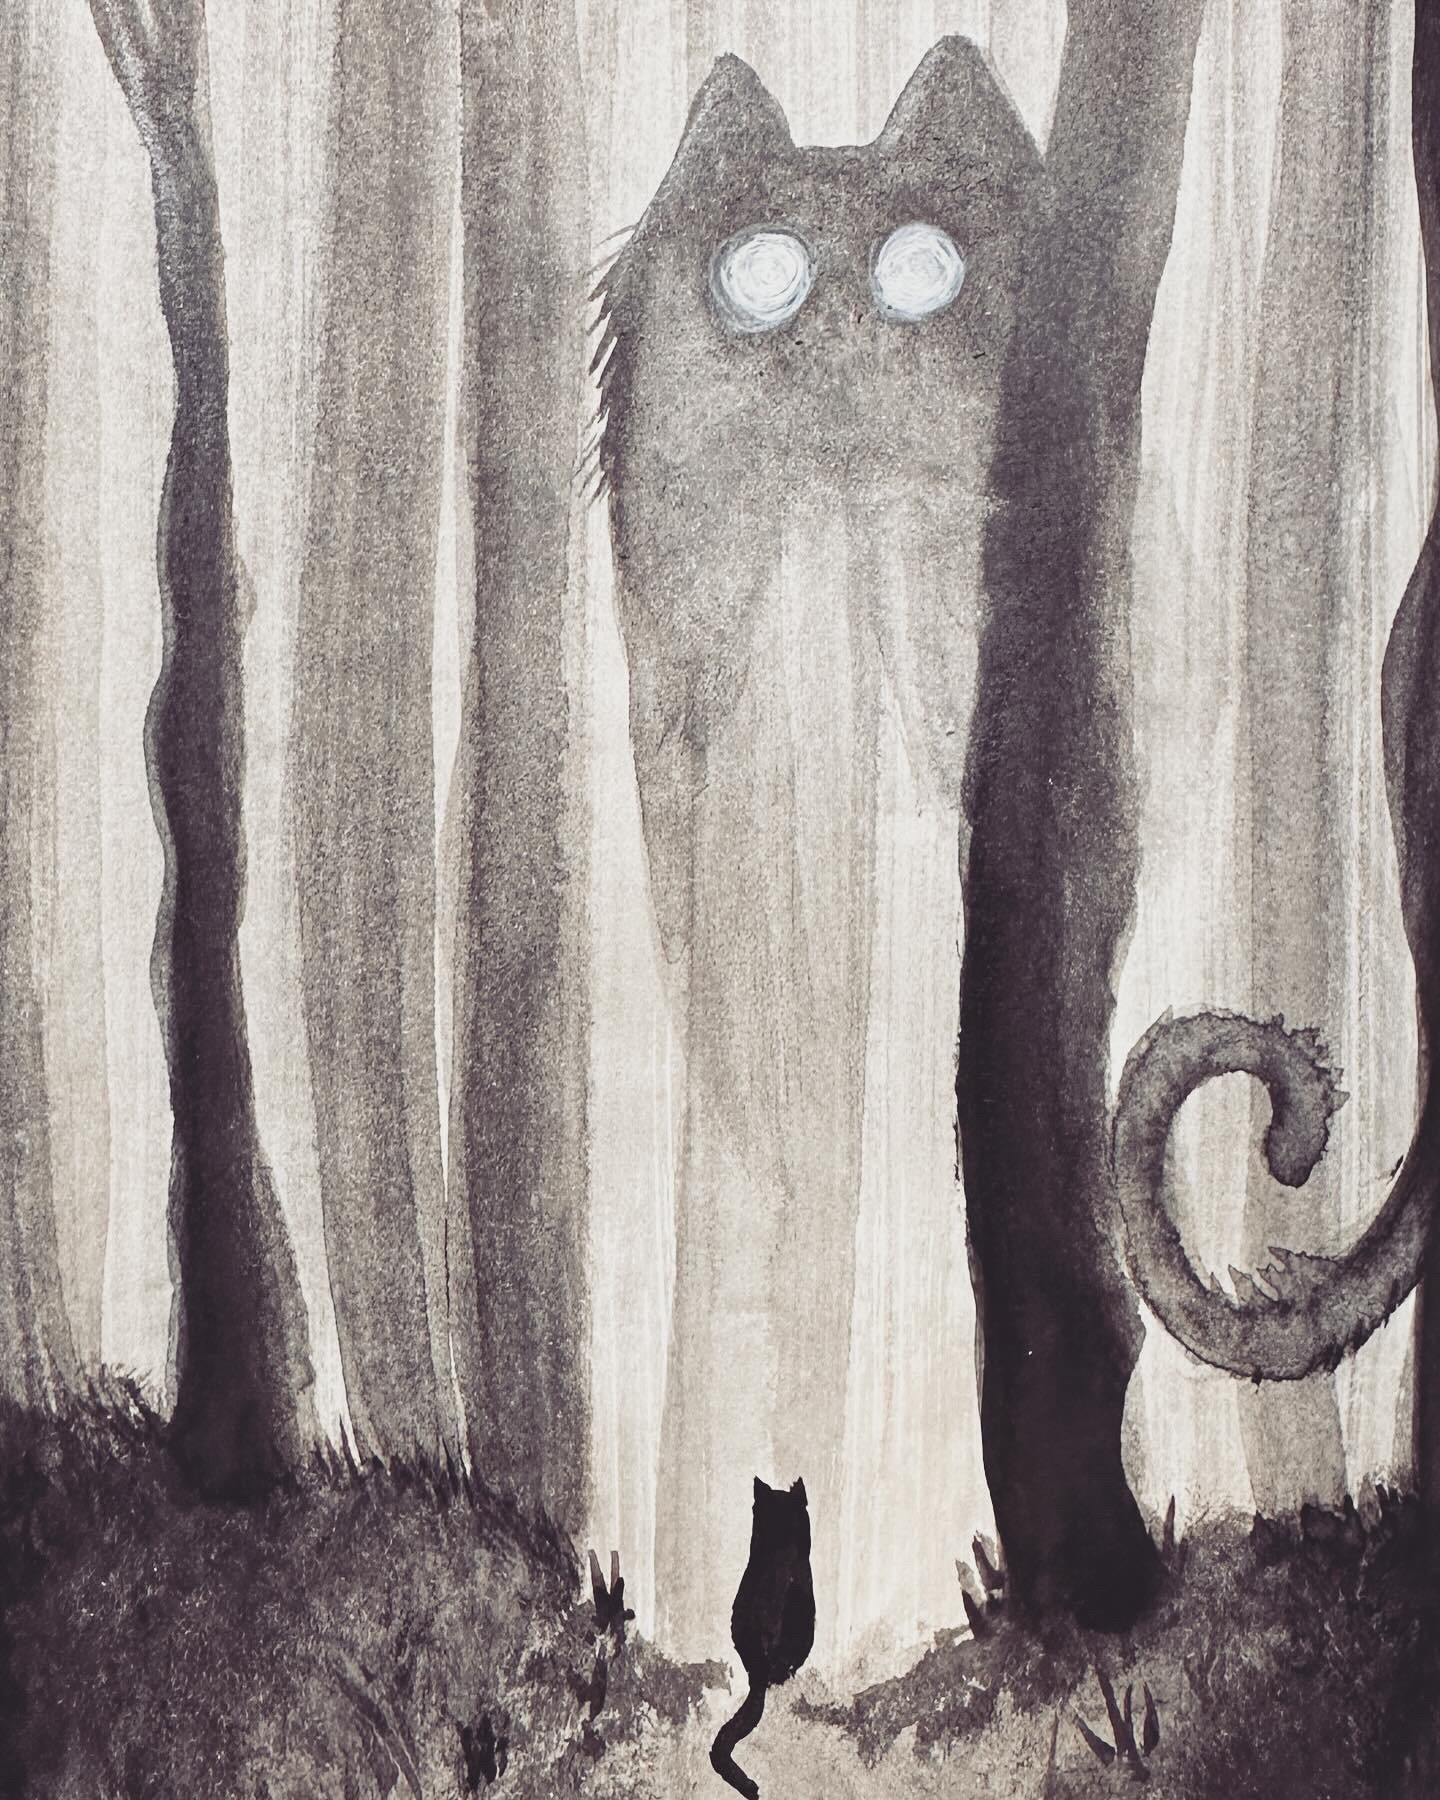 A small black cat in a great forest. The shadow of a giant cat goddess towers over her. She seems unphased.